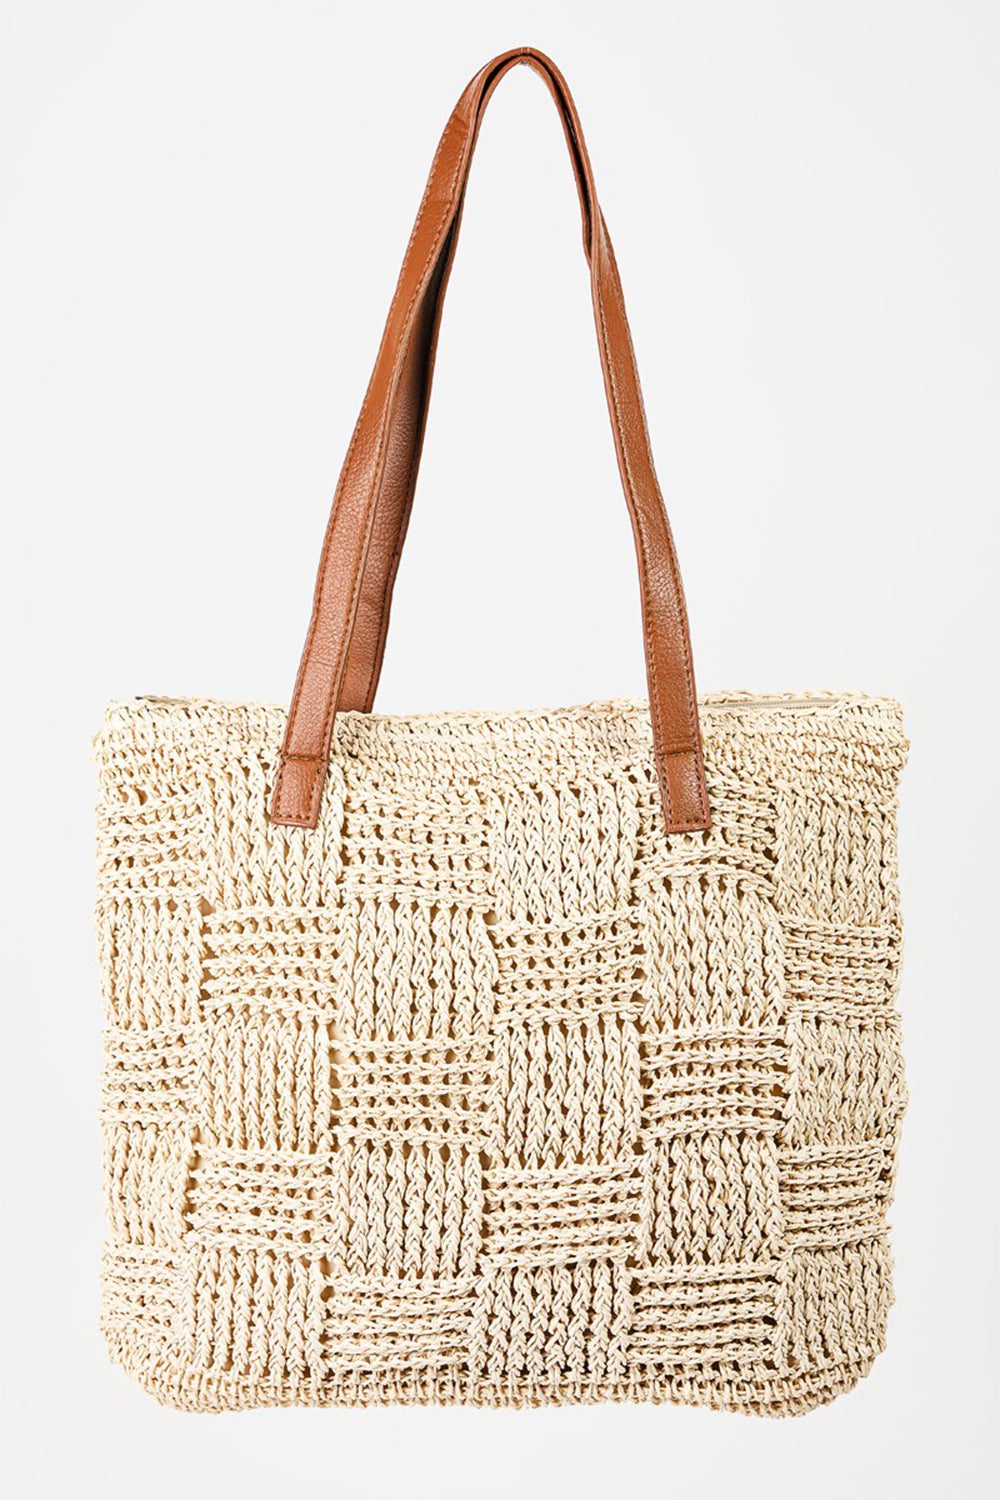 Fame Braided Faux Leather Strap Tote Bag - Sydney So Sweet